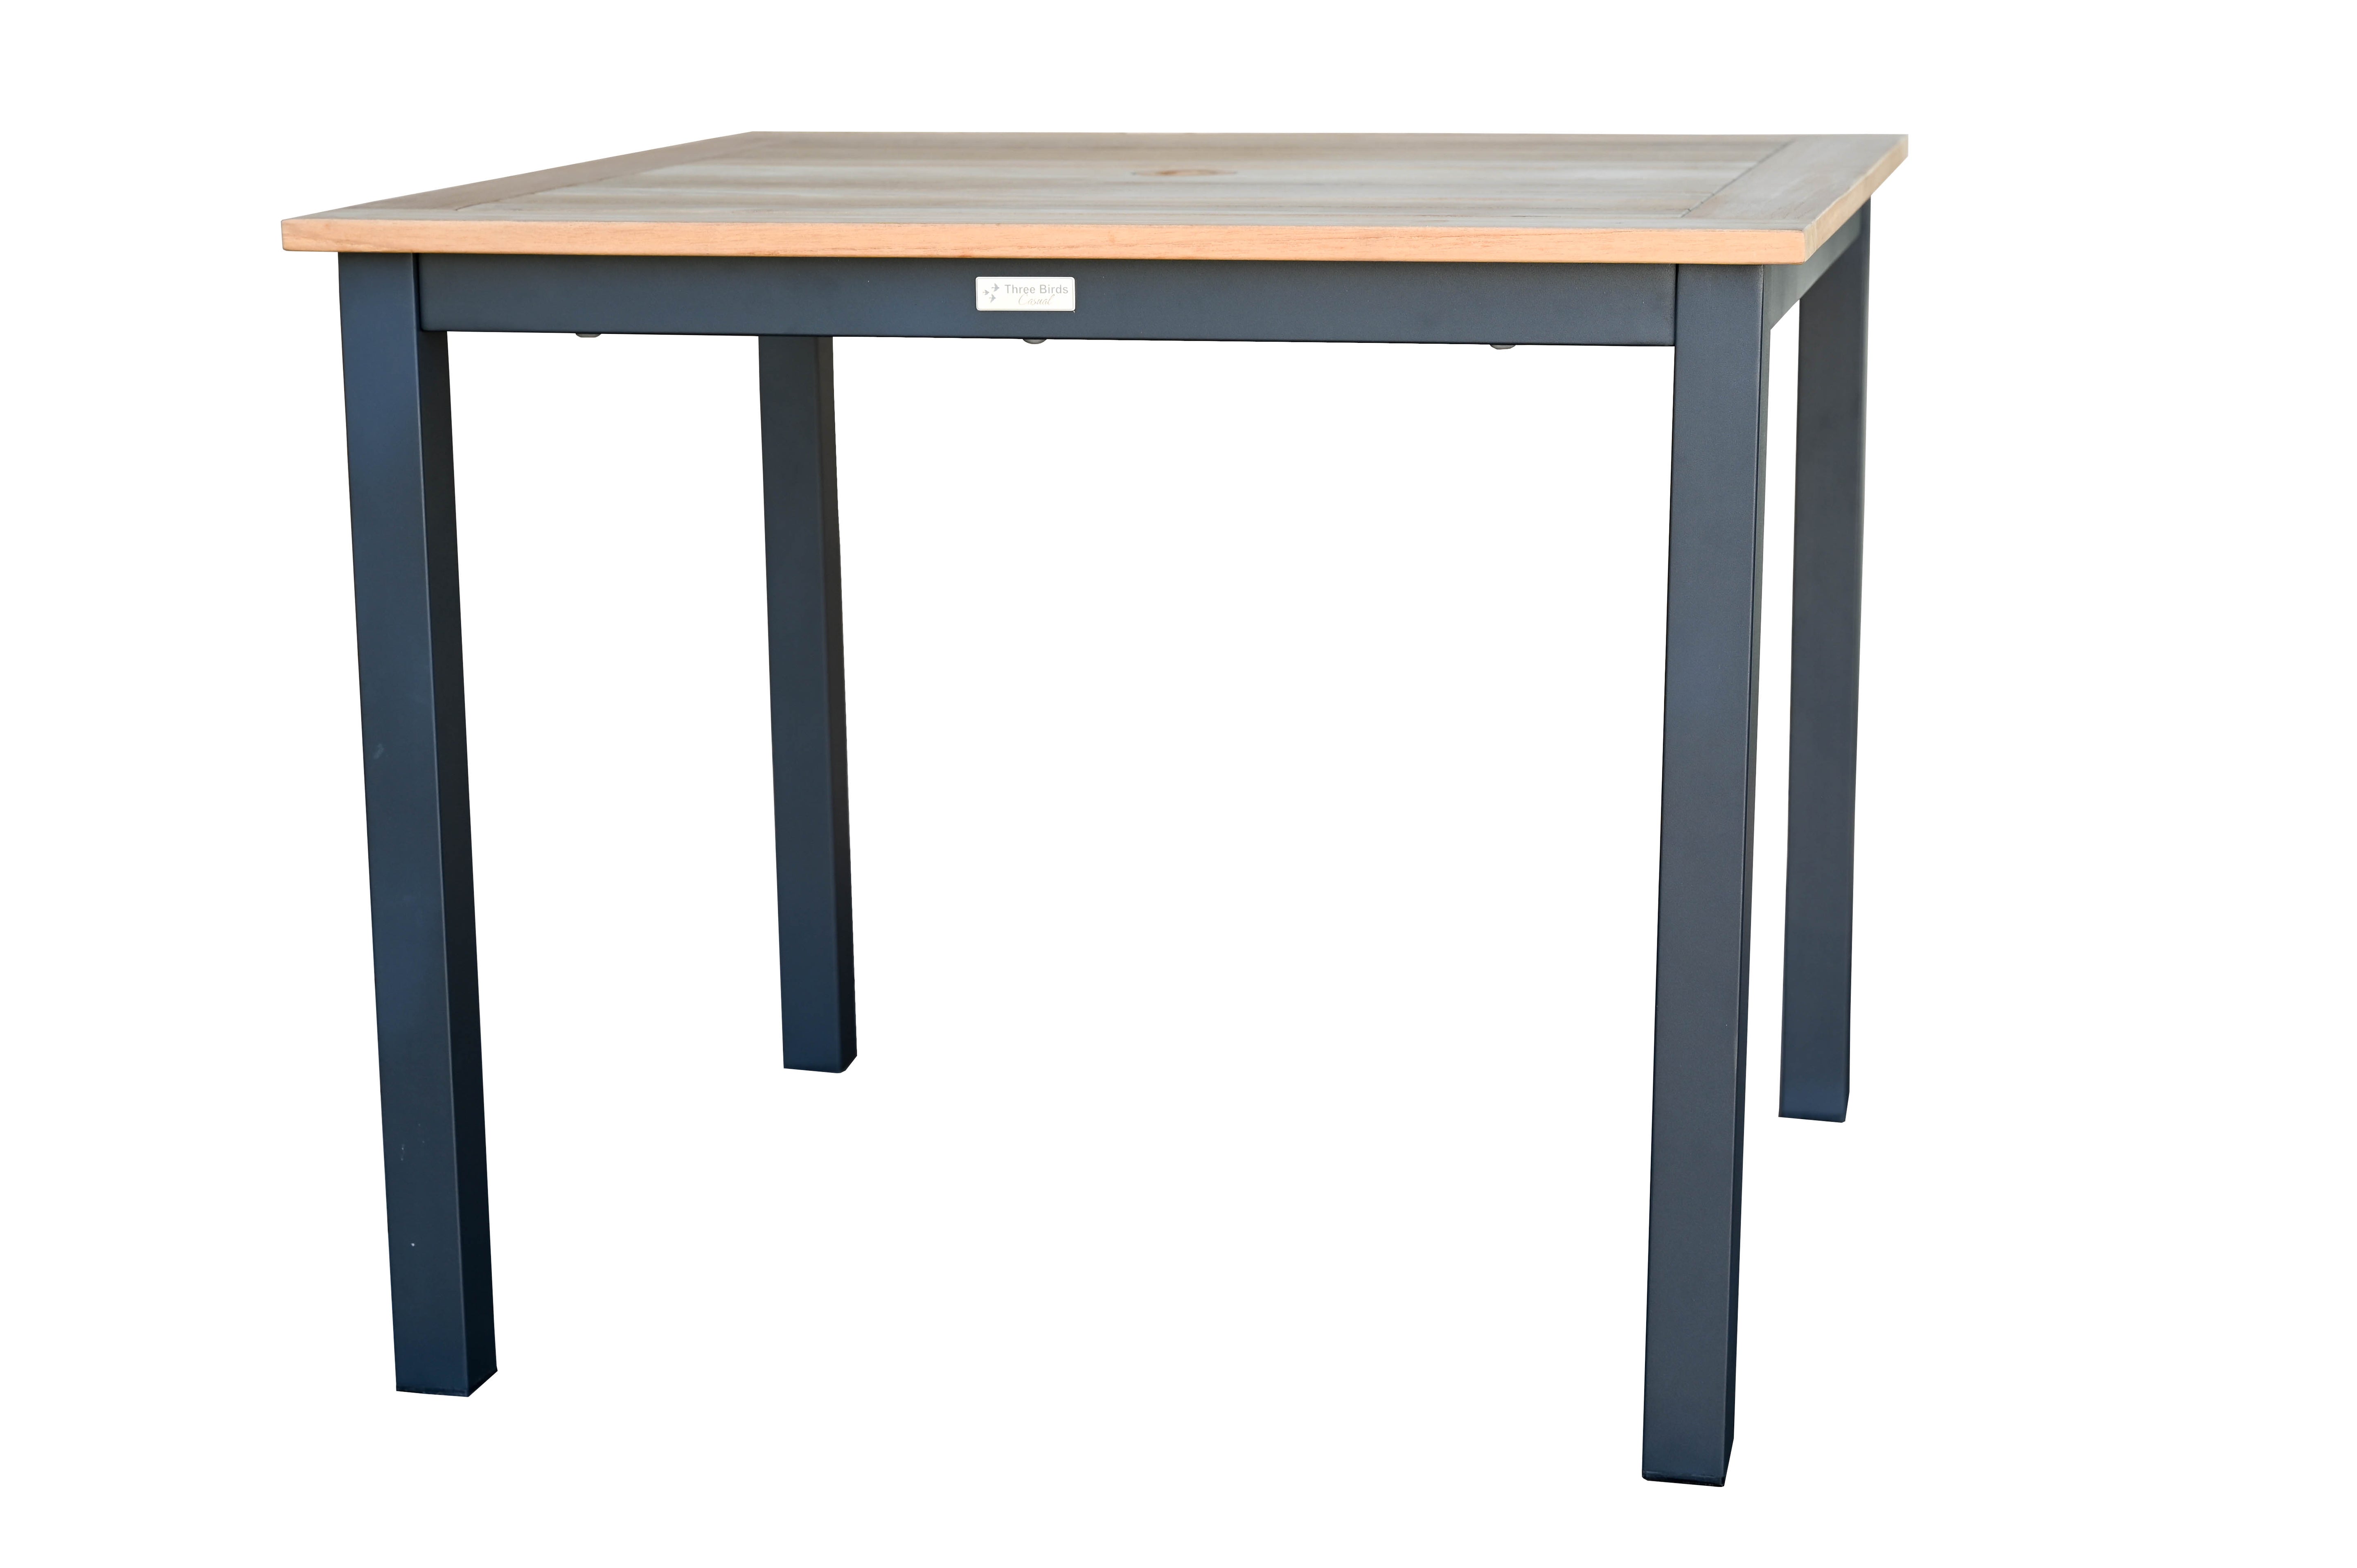 SoHo 36" Square Dining Table